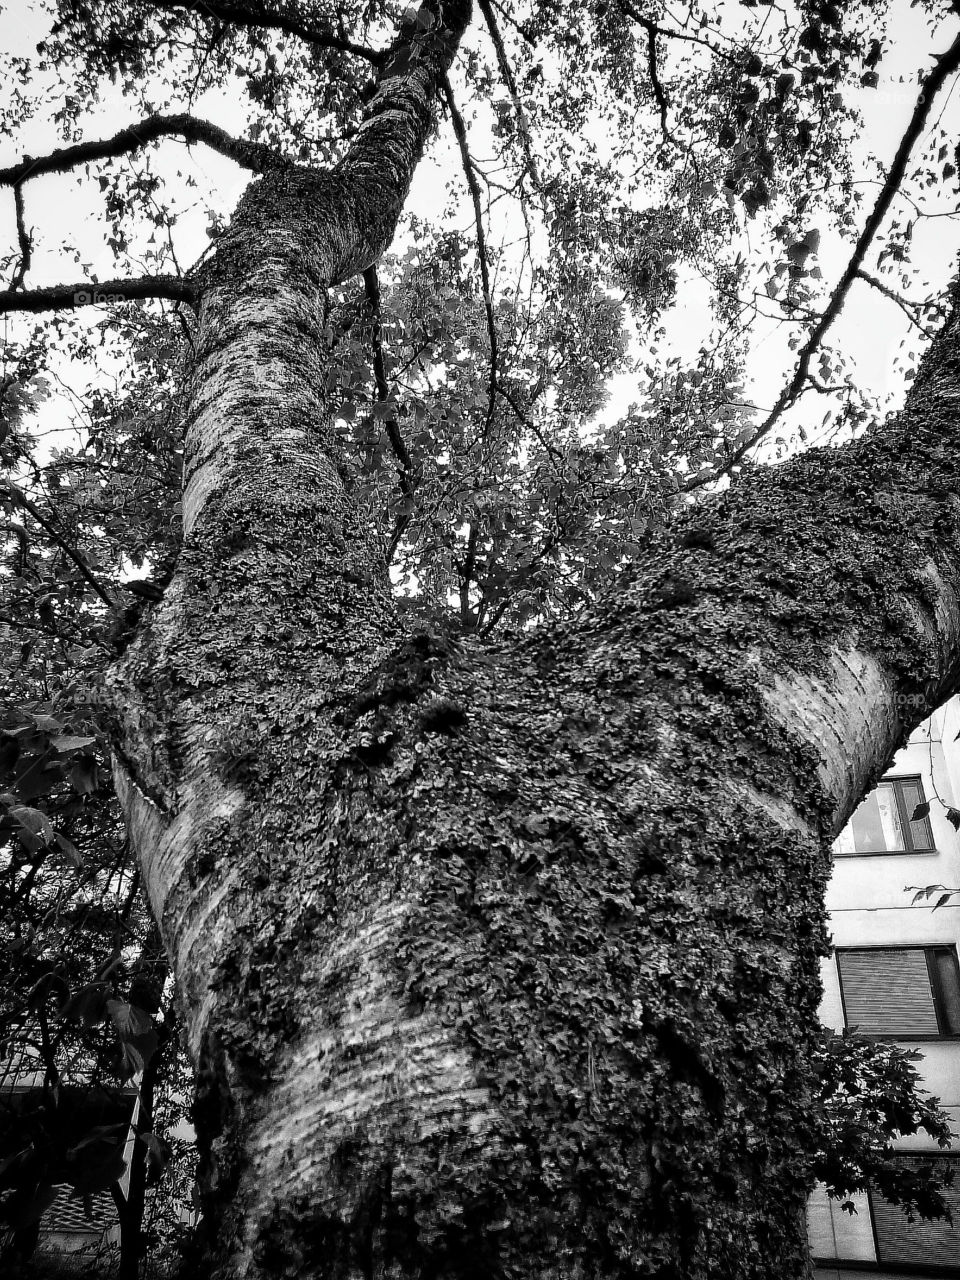 Tree & Moss - B&W Version.

Captured with Sony Xperia Z Ultra and developed in Snapseed.